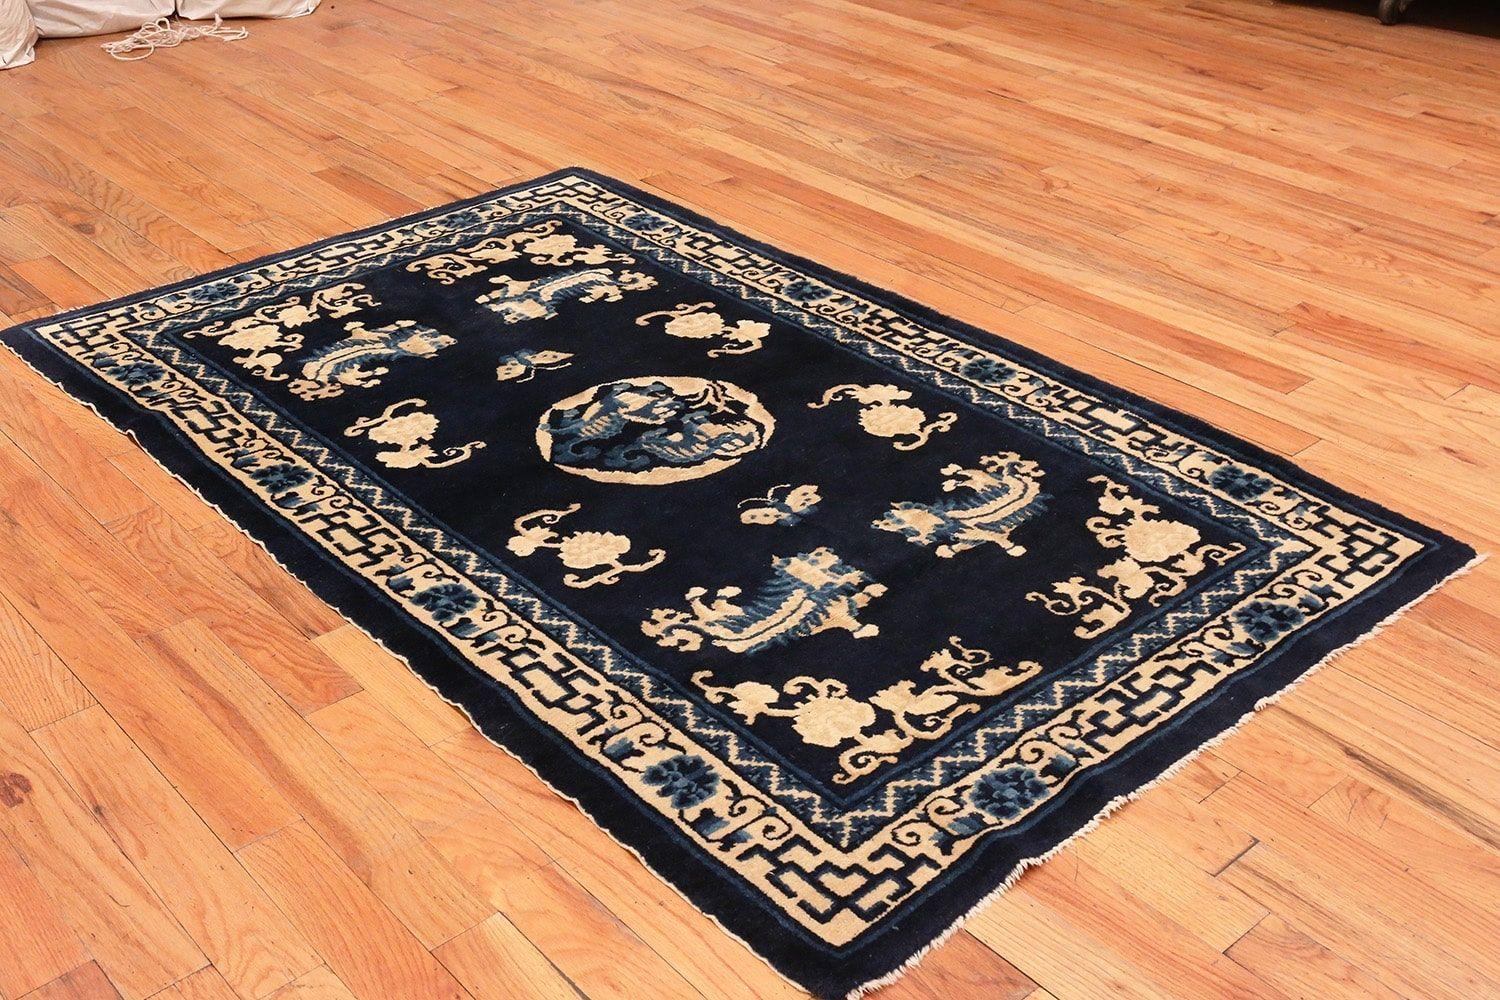 Beautiful midnight blue background small size antique Peking foo dog Chinese rug, country of origin or rugs type: Antique rugs from China, date circa turn of the 20th century. Size: 4 ft 1 in x 6 ft 6 in (1.24 m x 1.98 m)

This intriguing and